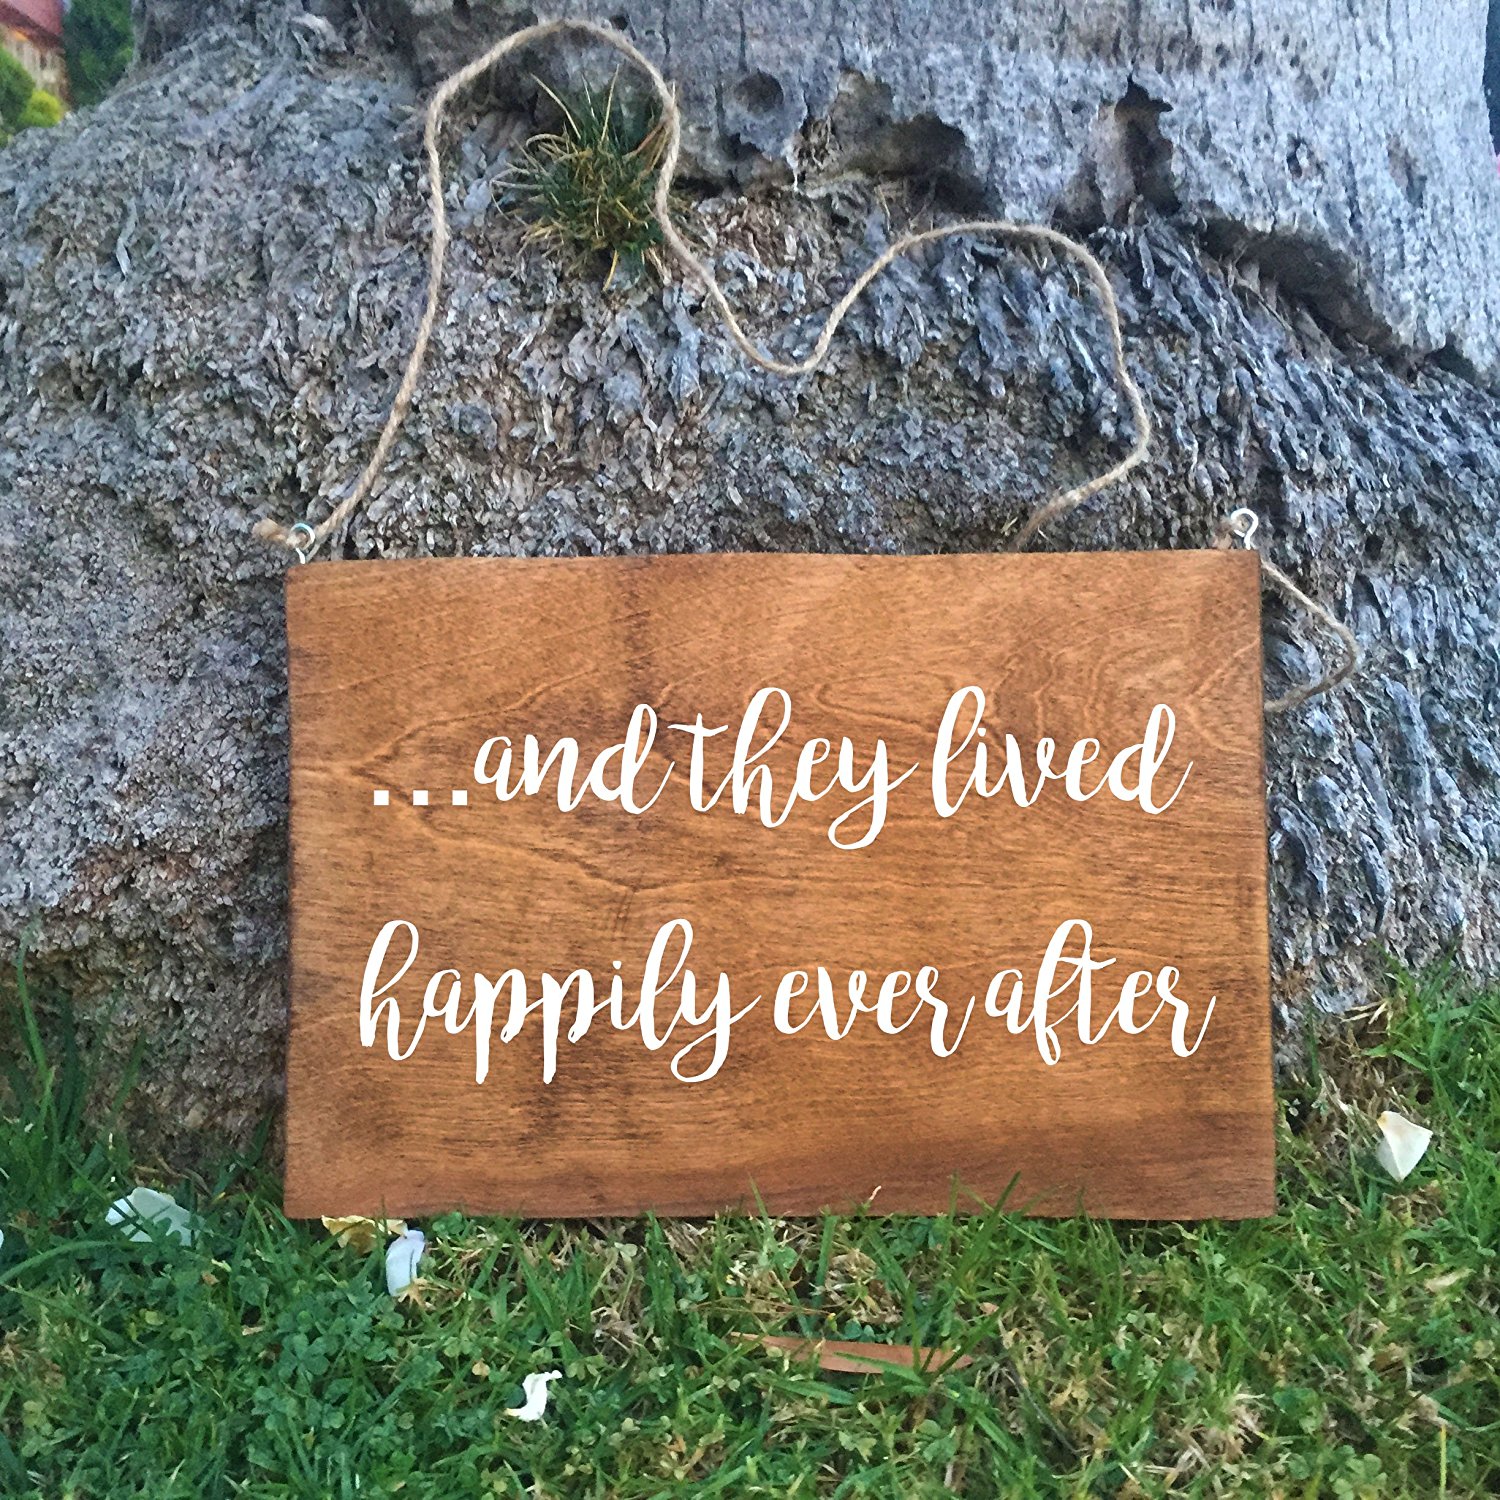 ring bearer signs, here comes the bride sign, custom wedding signs, ring bearer gifts 